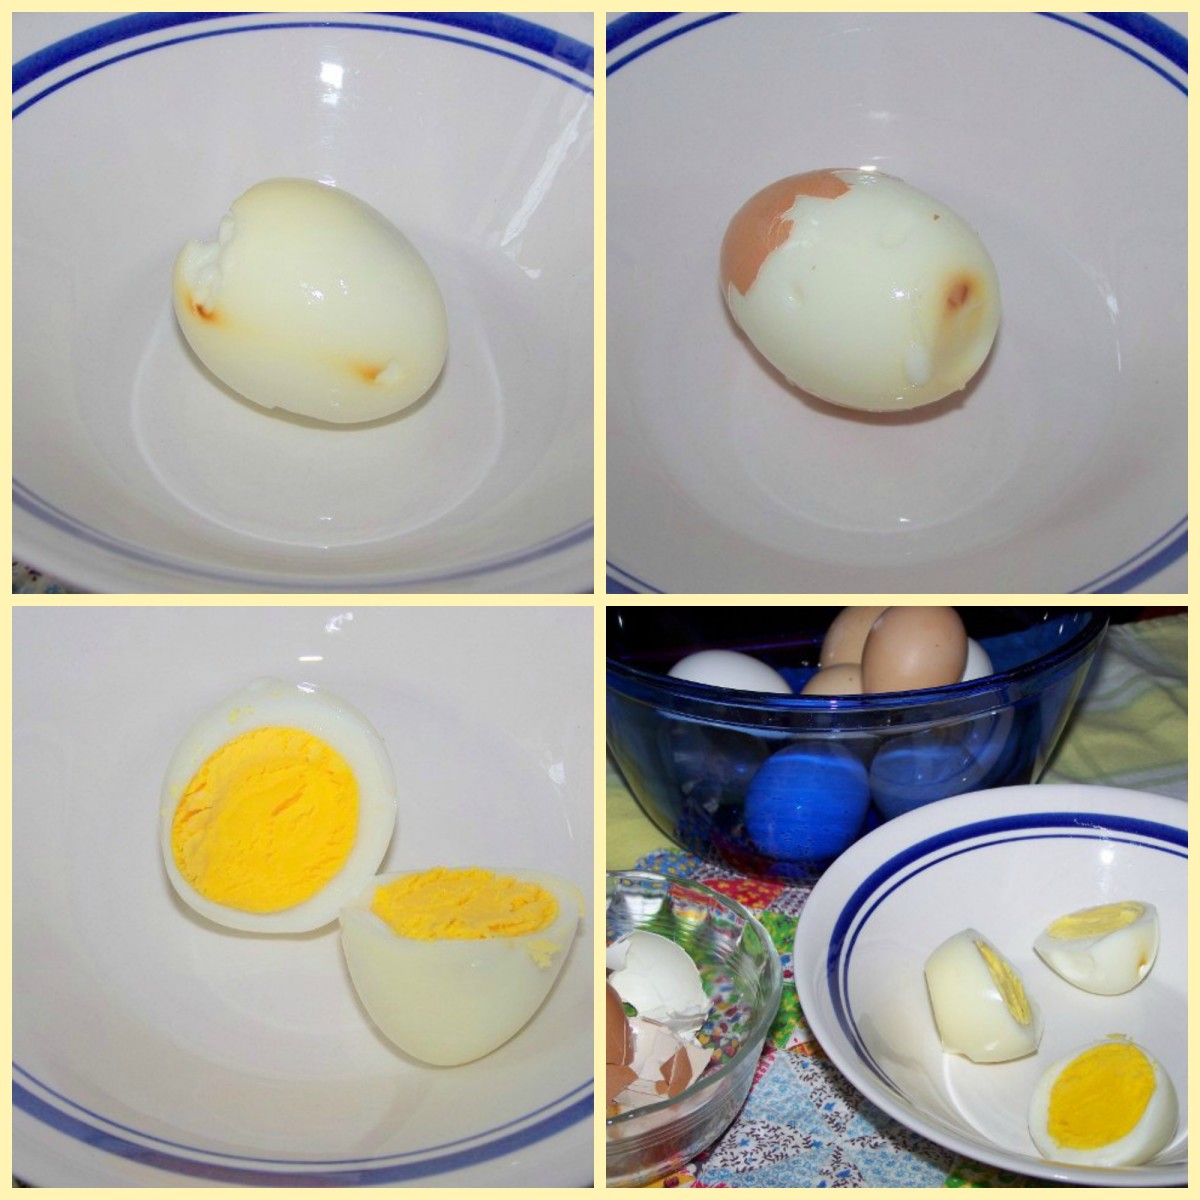 Crack and shelled eggs